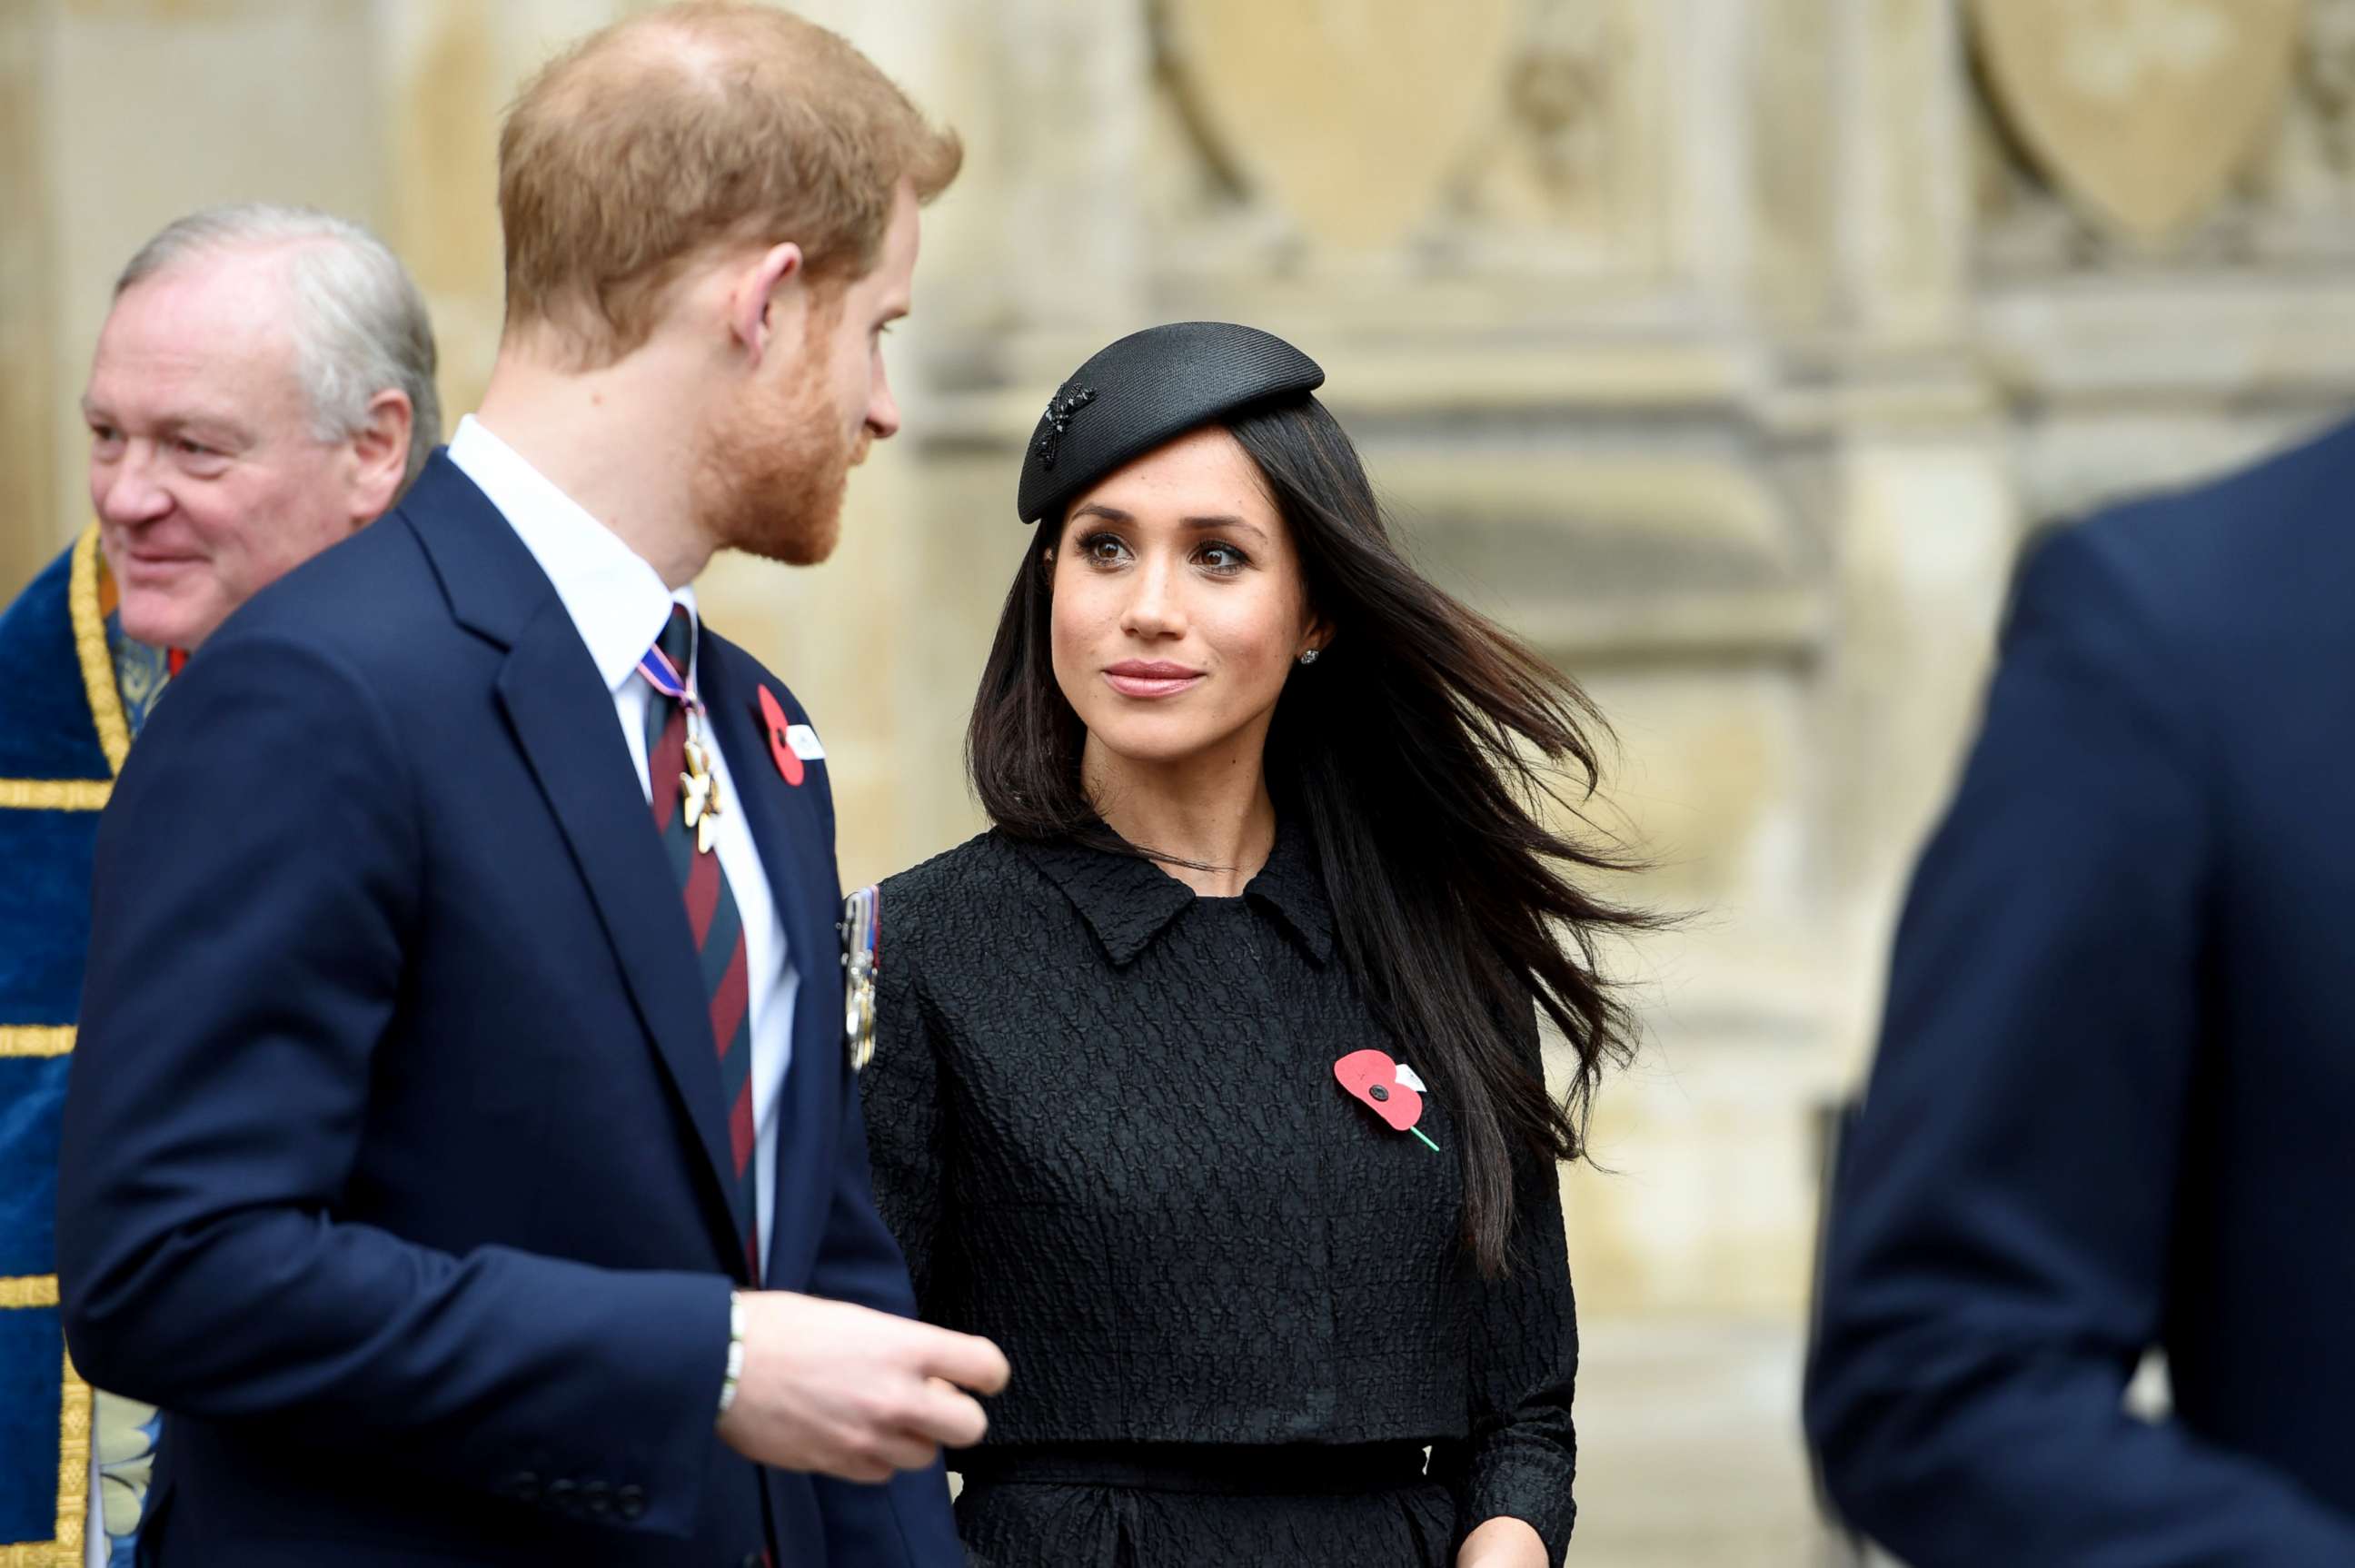 PHOTO: Britain's Prince Harry and Meghan Markle attend a Service of Thanksgiving and Commemoration on ANZAC Day at Westminster Abbey in London, Britain, April 25, 2018.